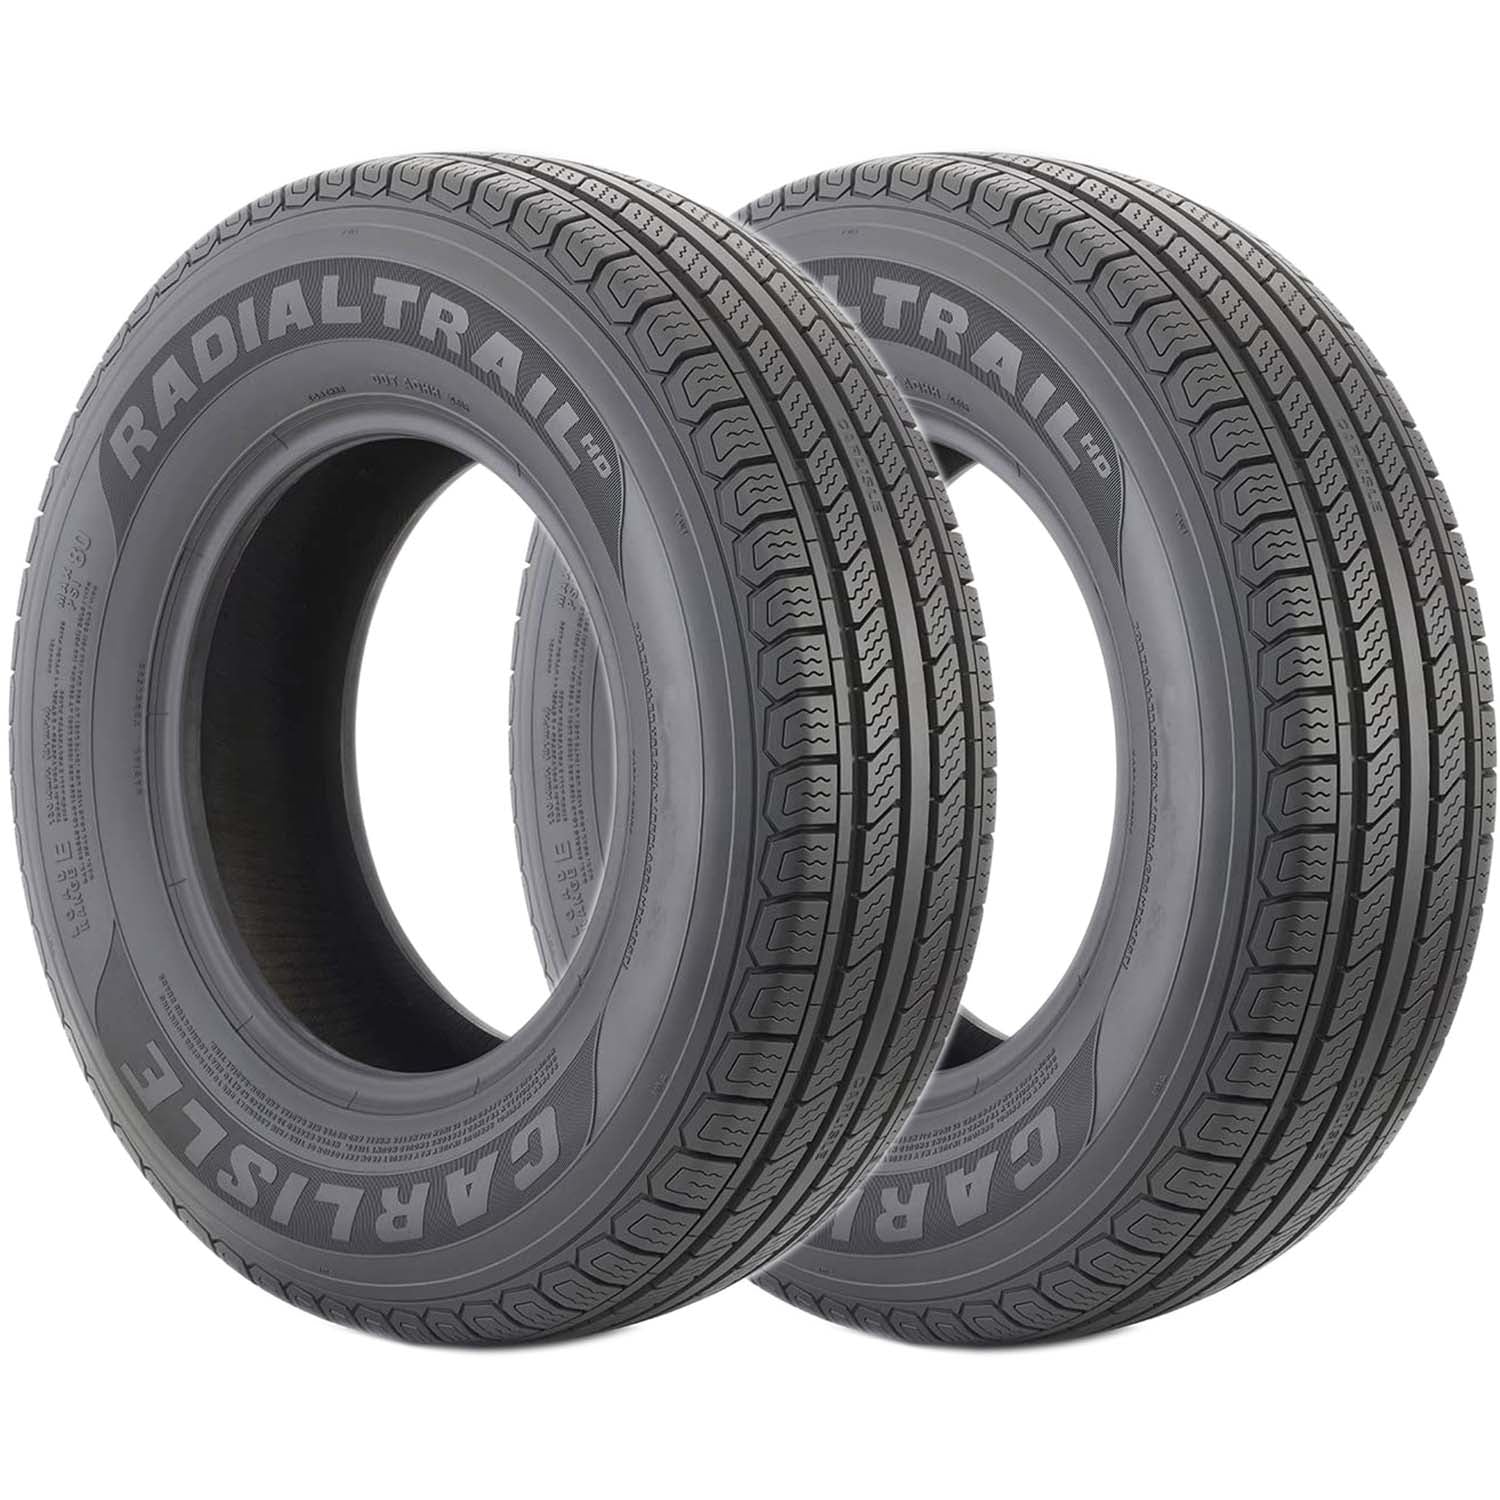 Carlisle Radial Trail HD Trailer Tire LRC 6ply ST175/80R13 Pack of 2